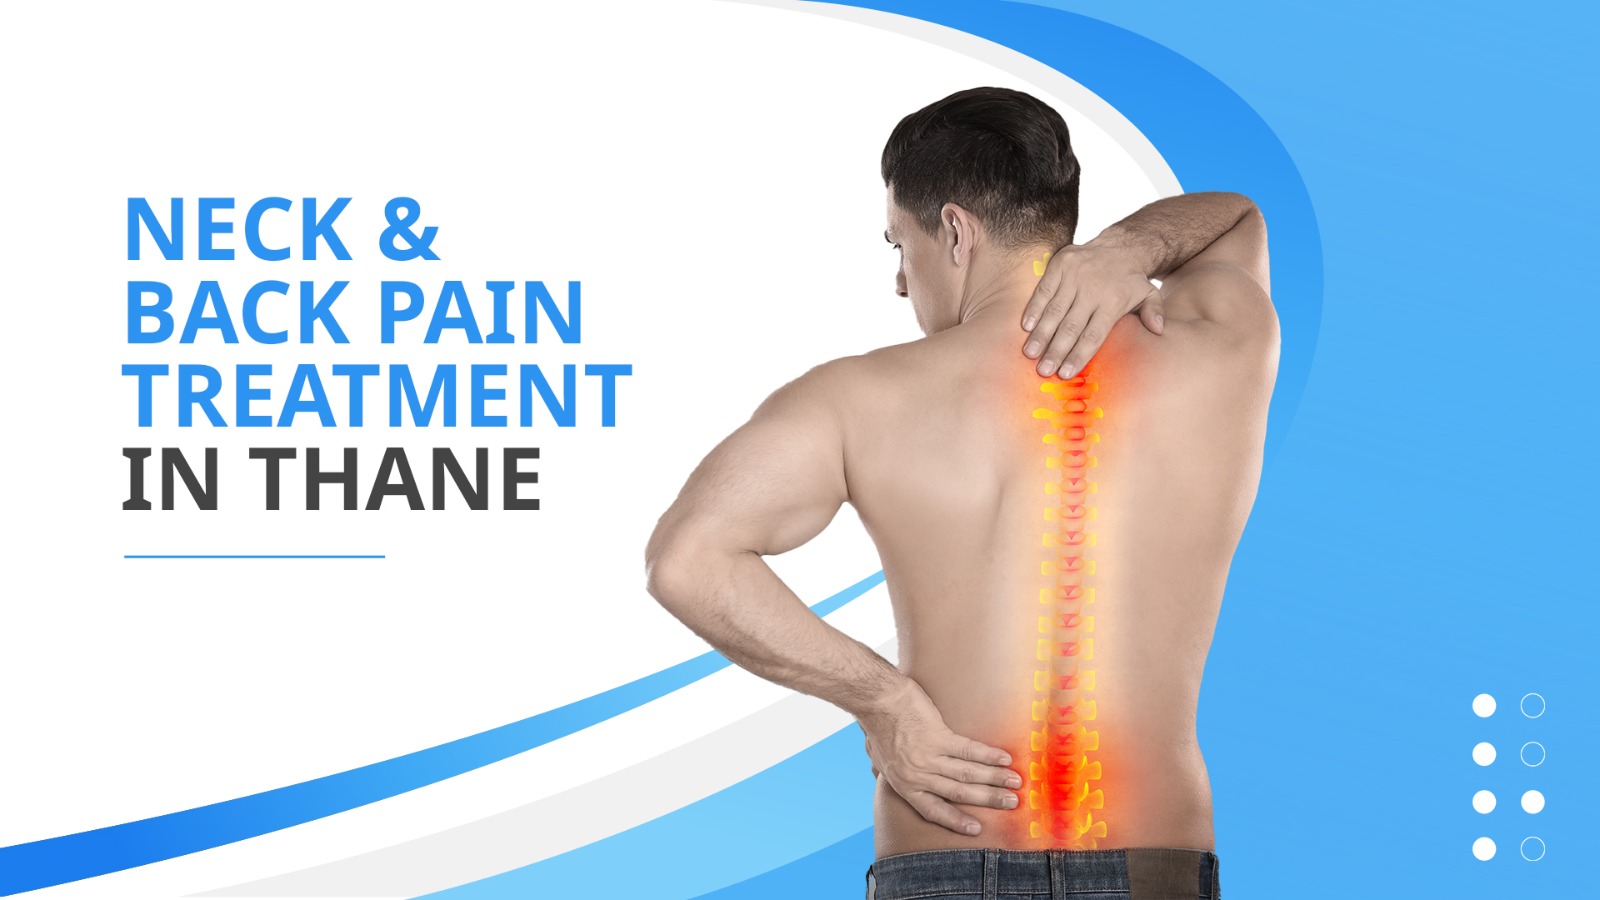 Neck & Back Pain Treatment in Thane